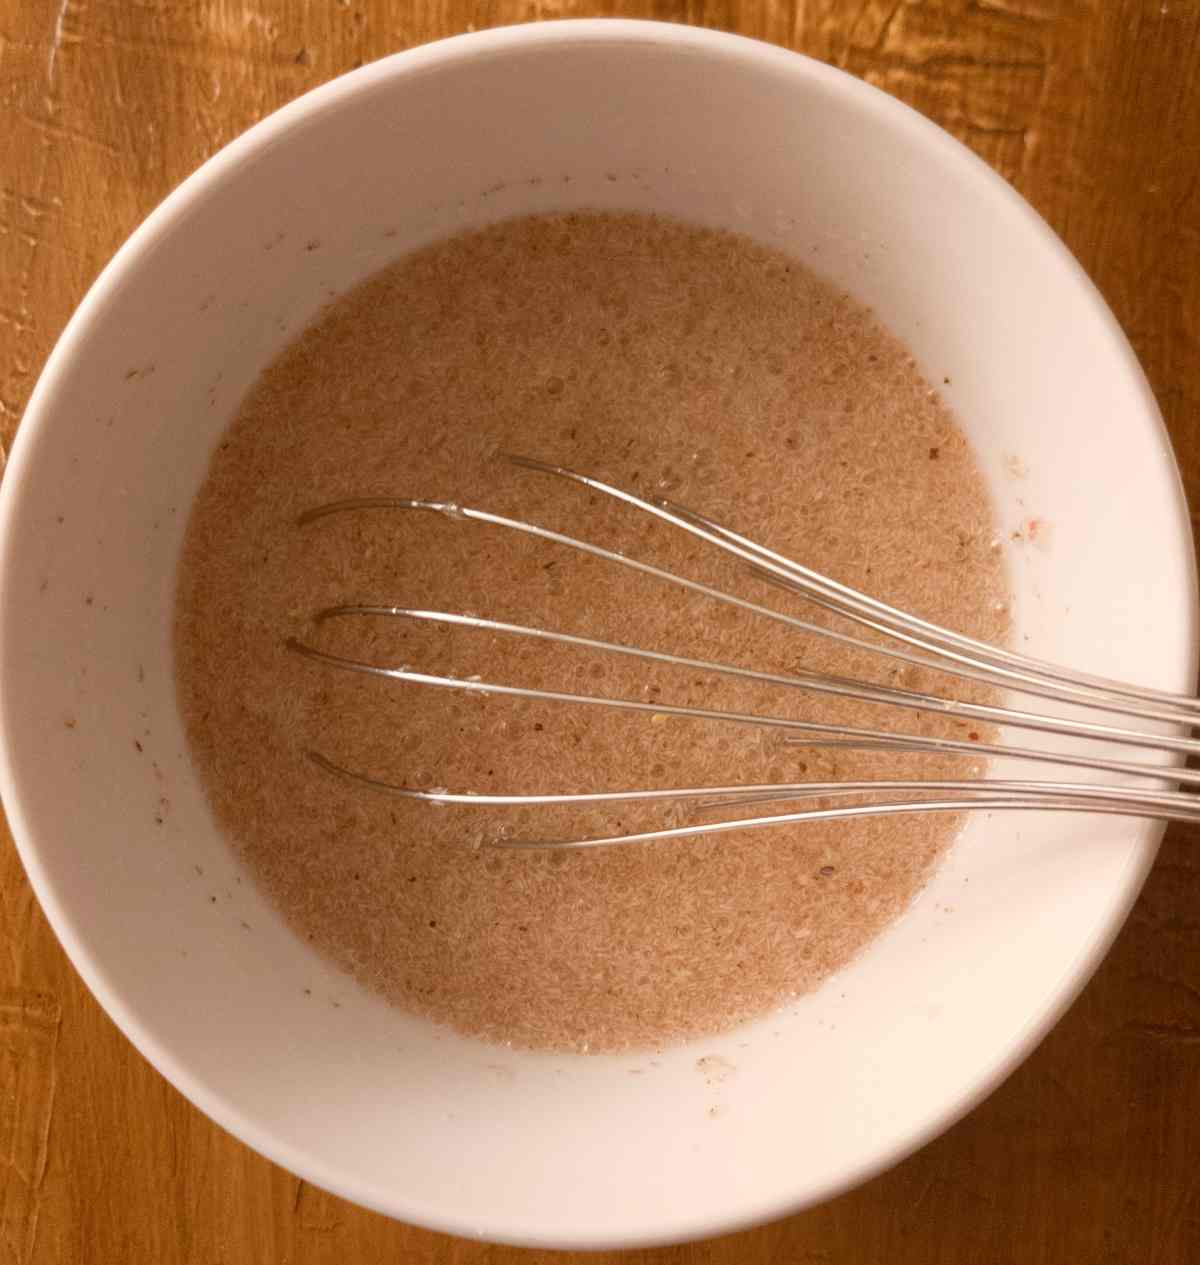 Psyllium husk mixed with water in a small bowl with a whisk.